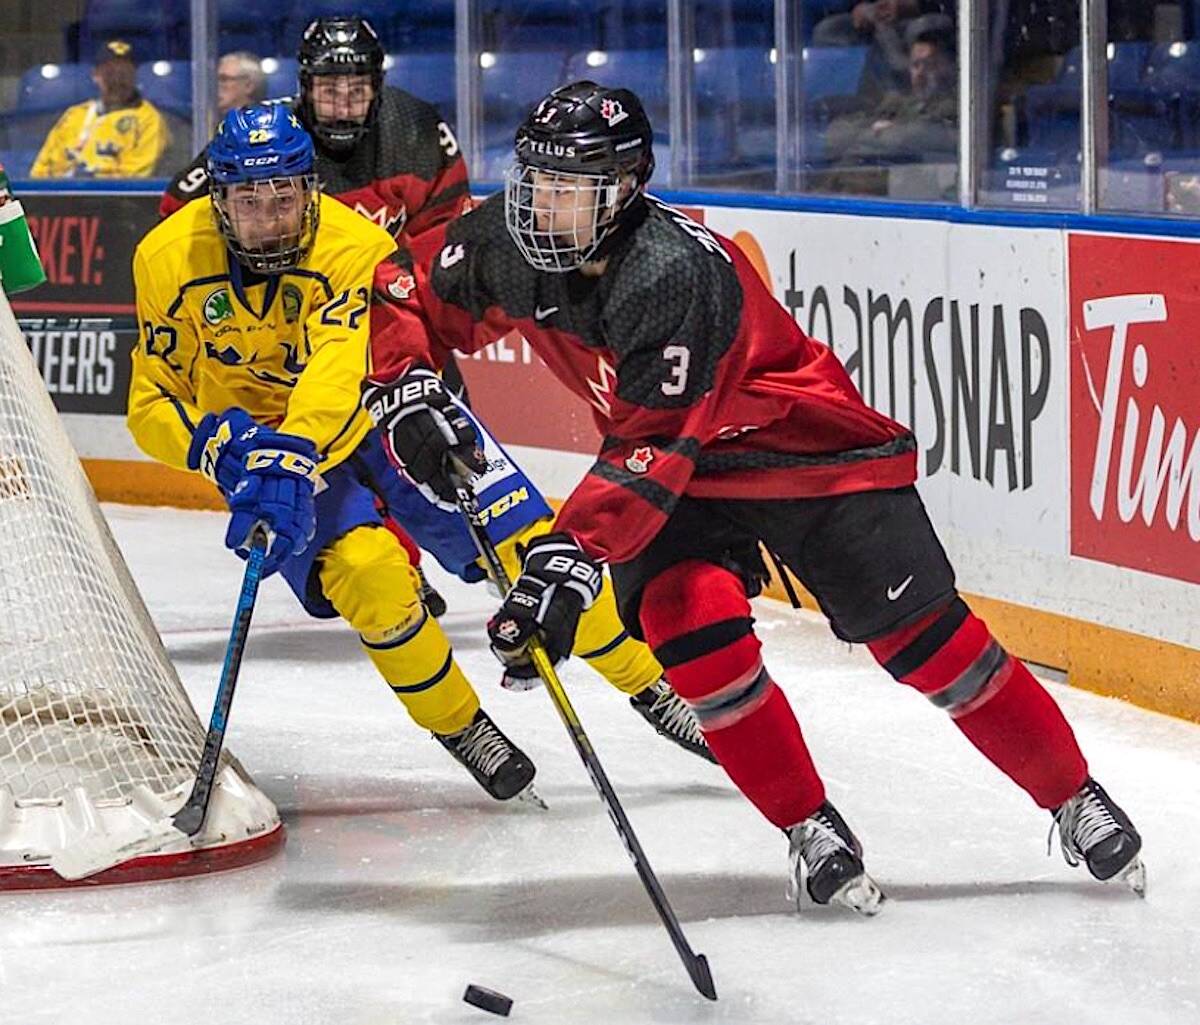 Canadian and Swedish hockey players in a photo featured in the 86-page 2022 World Under-17 Hockey Challenge guide and record book posted to the website hockeycanada.ca.